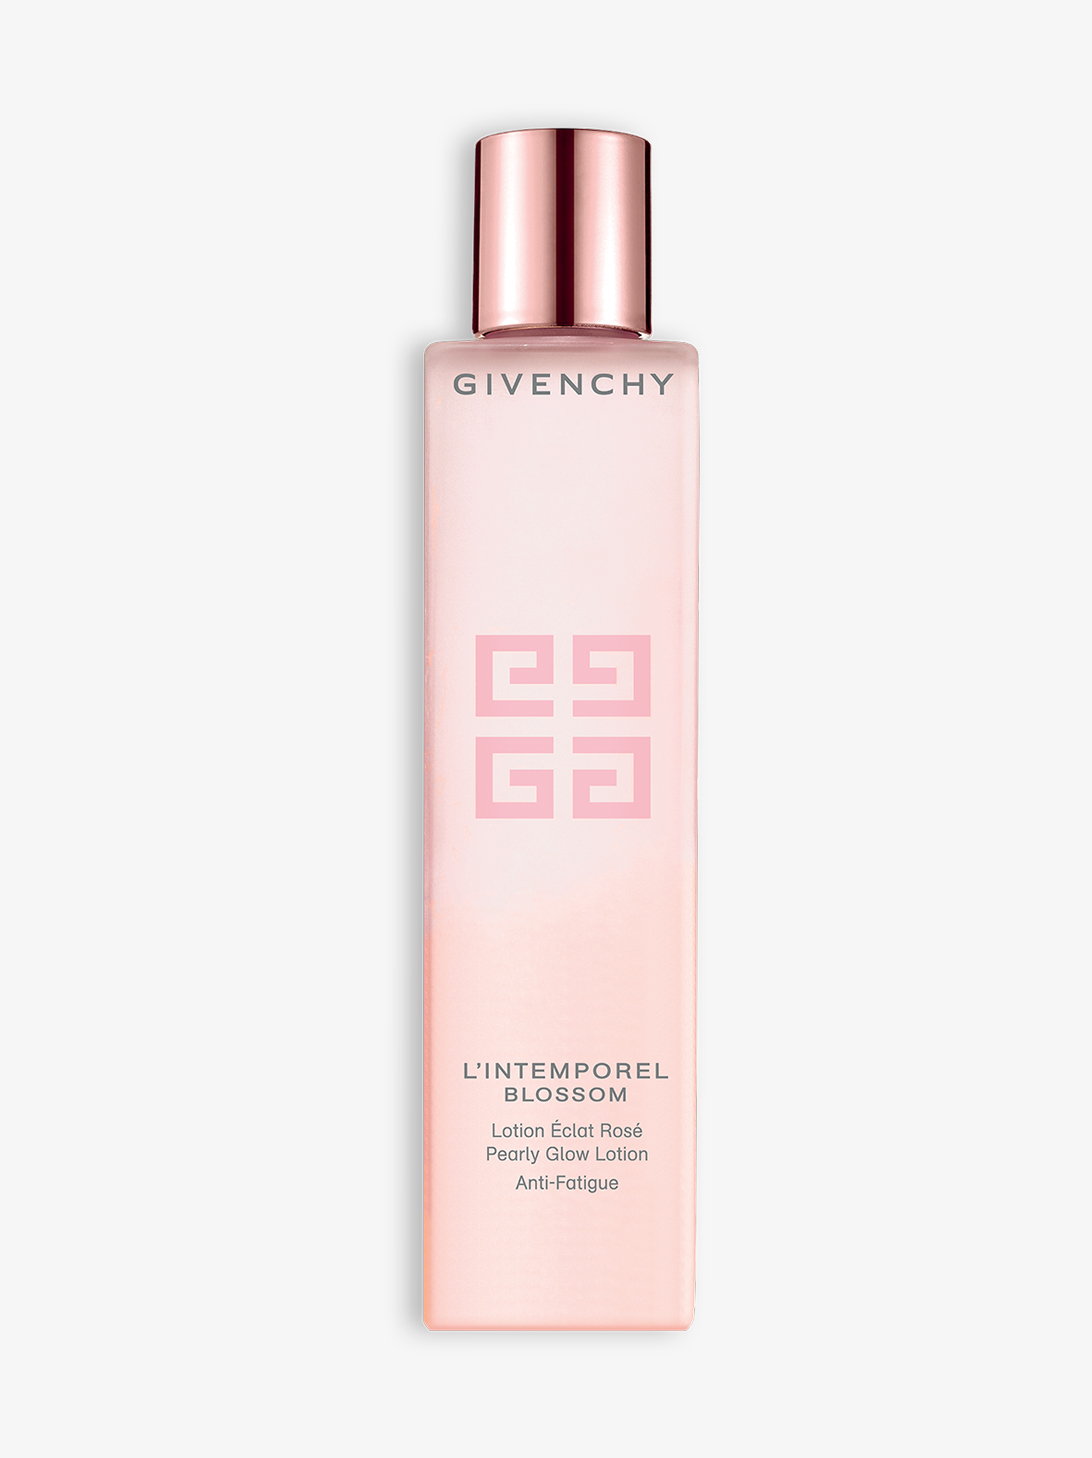 L'INTEMPOREL BLOSSOM  Pearly Glow Lotion Anti-Fatigue ∷ GIVENCHY